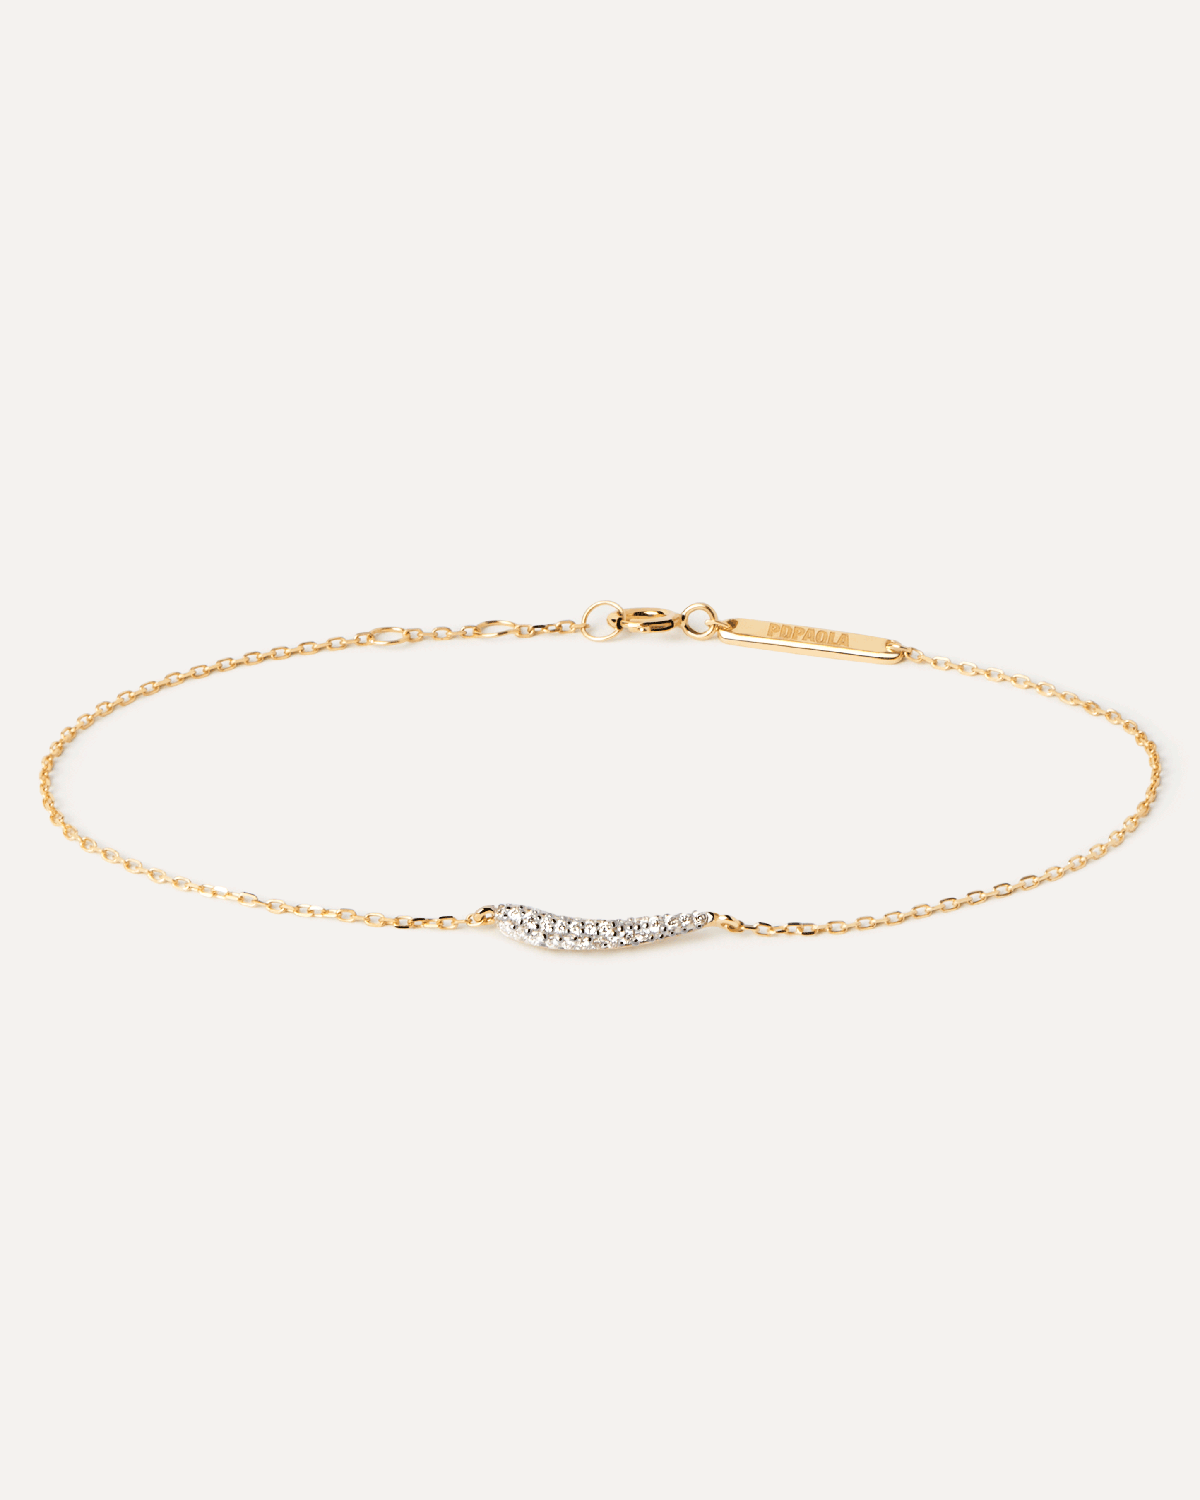 Diamonds and gold Nilo bracelet. Solid yellow gold bracelet with a curved point shape pavé lab-grown diamond of 0.13 carats. Get the latest arrival from PDPAOLA. Place your order safely and get this Best Seller.